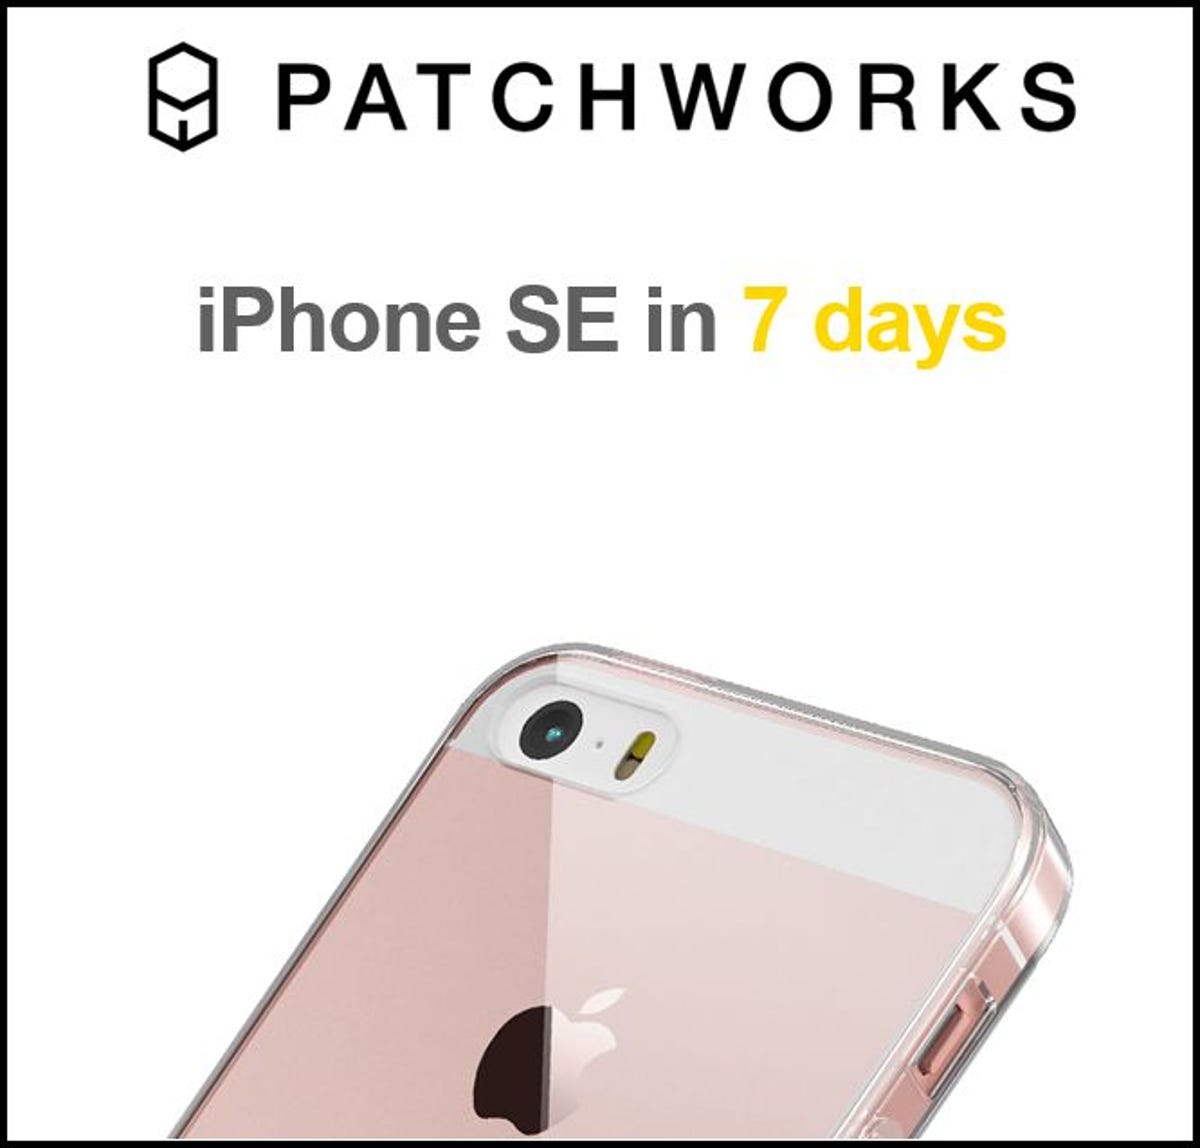 patchworks-iphone-se-email.jpg